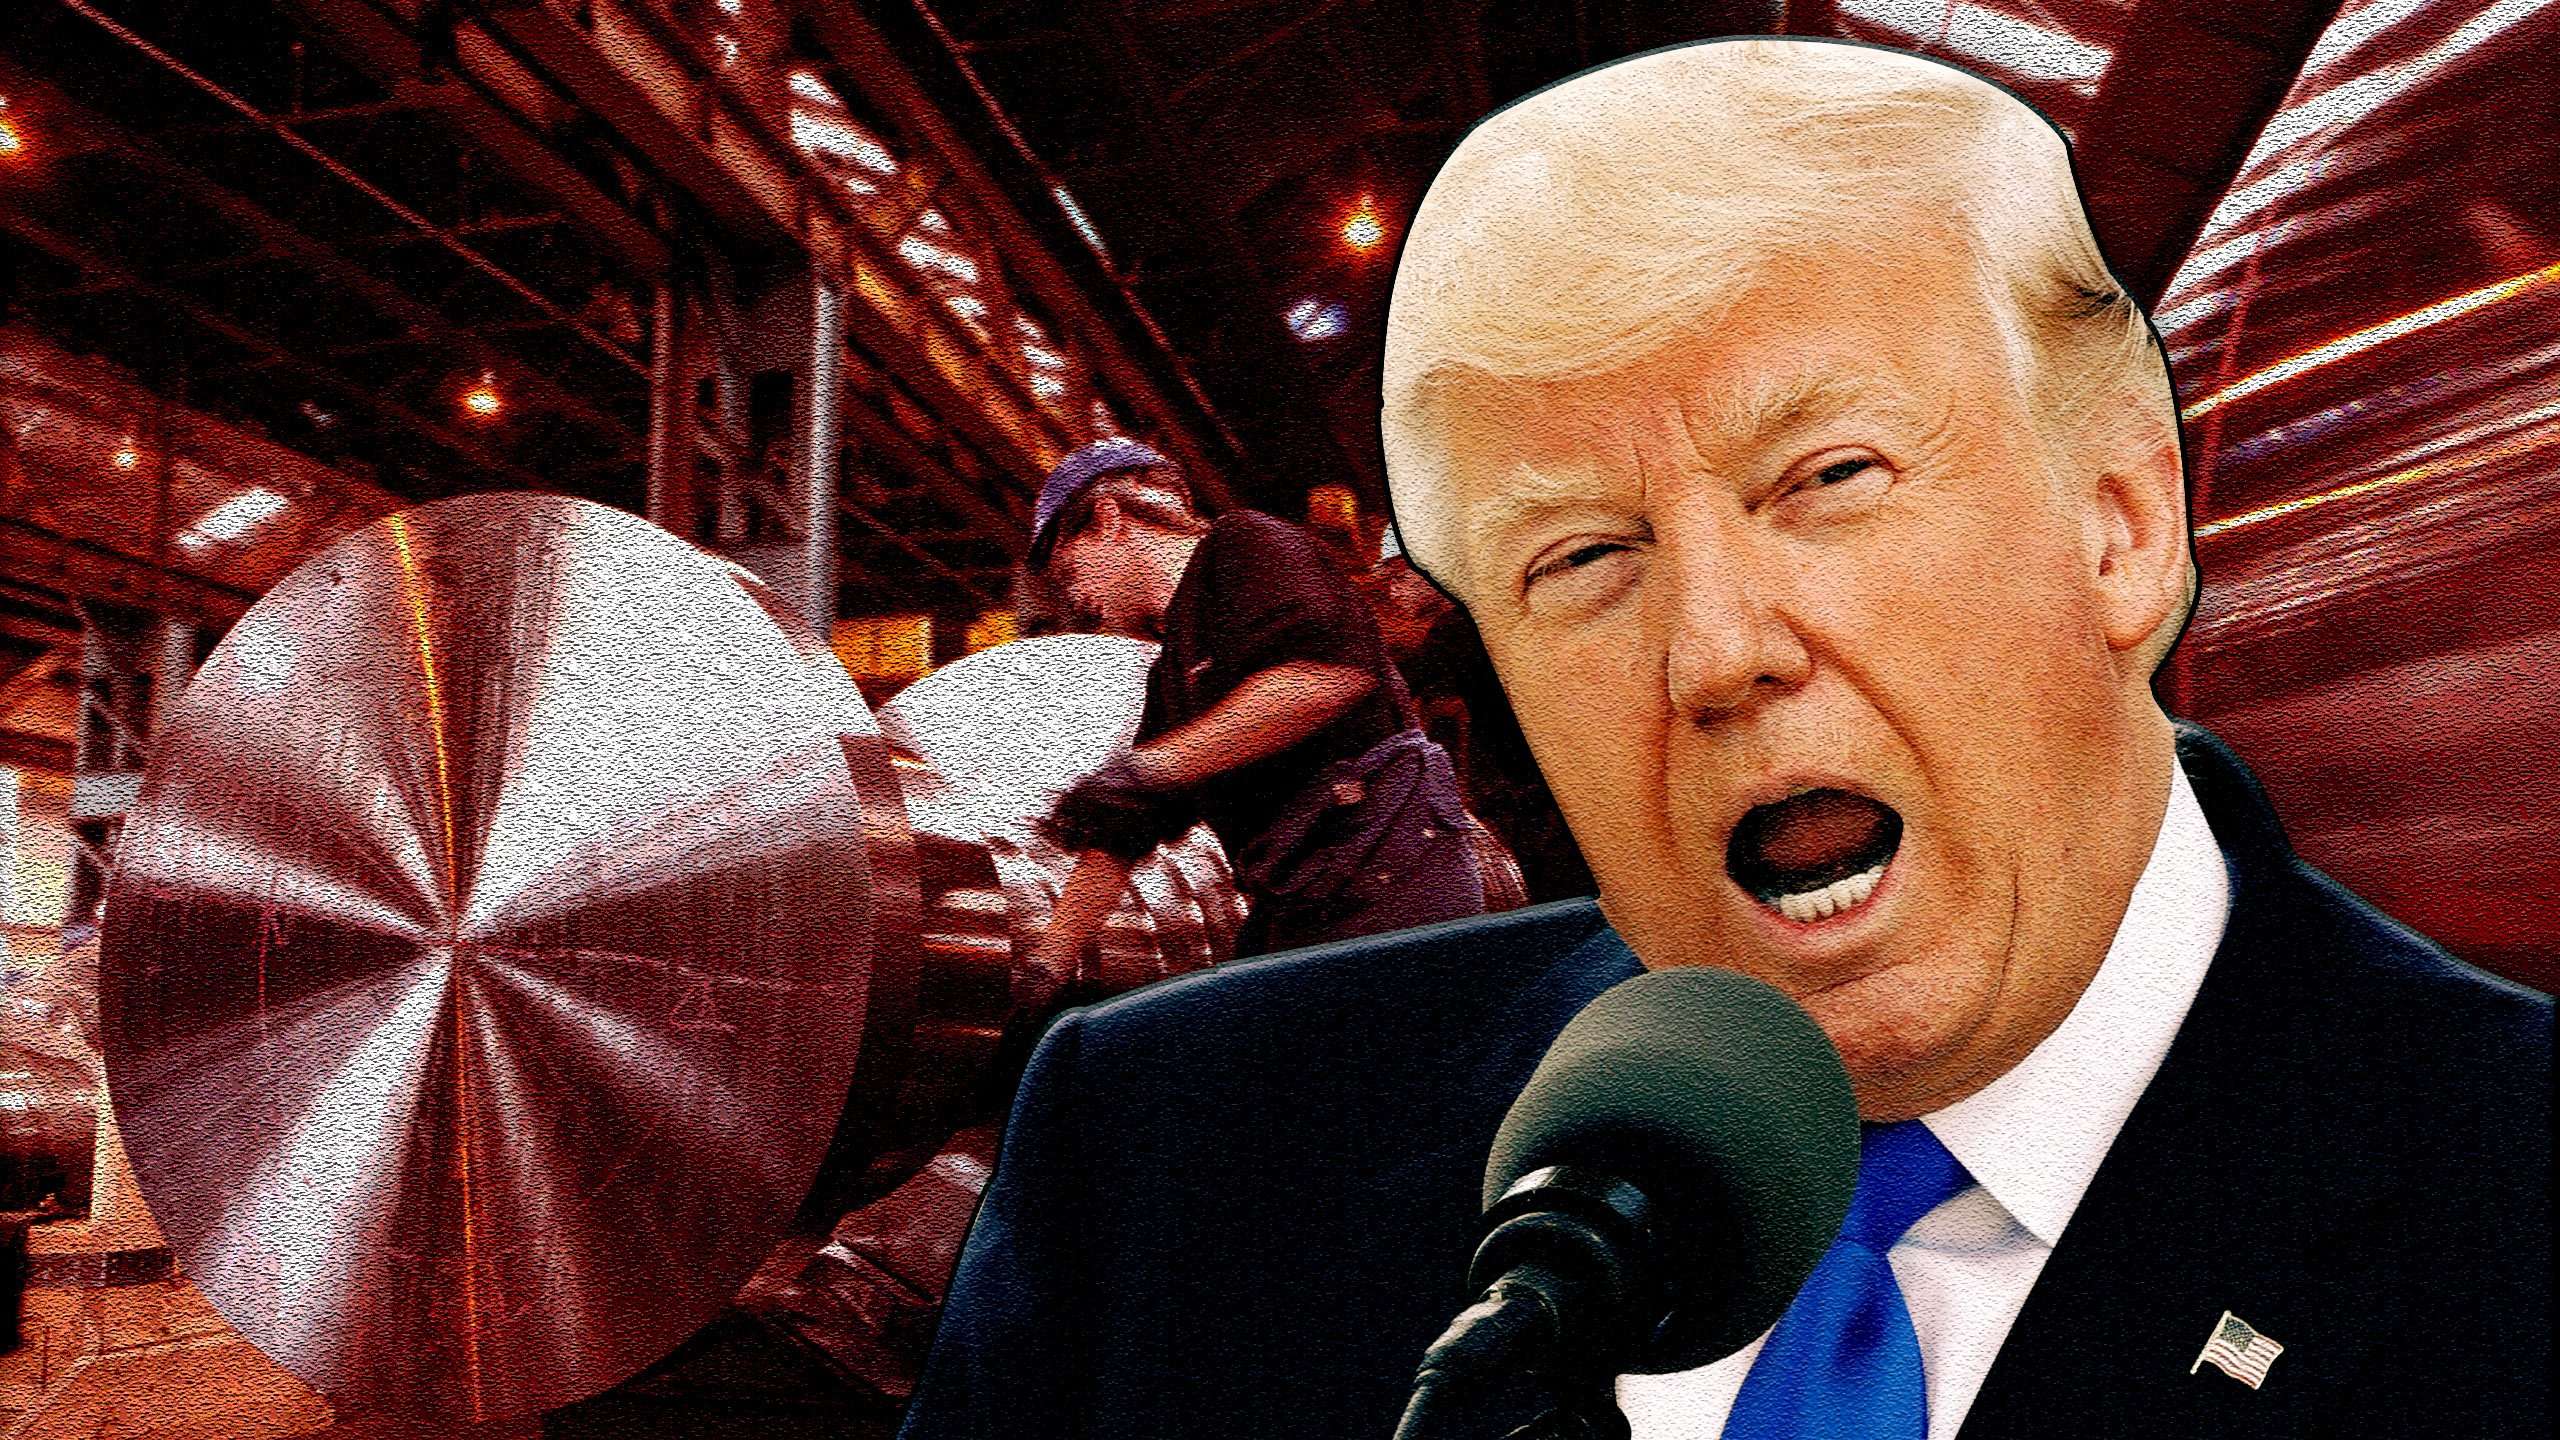 image for Carrier Sends Jobs to Mexico, Workers Say Trump ‘Misled’ Them